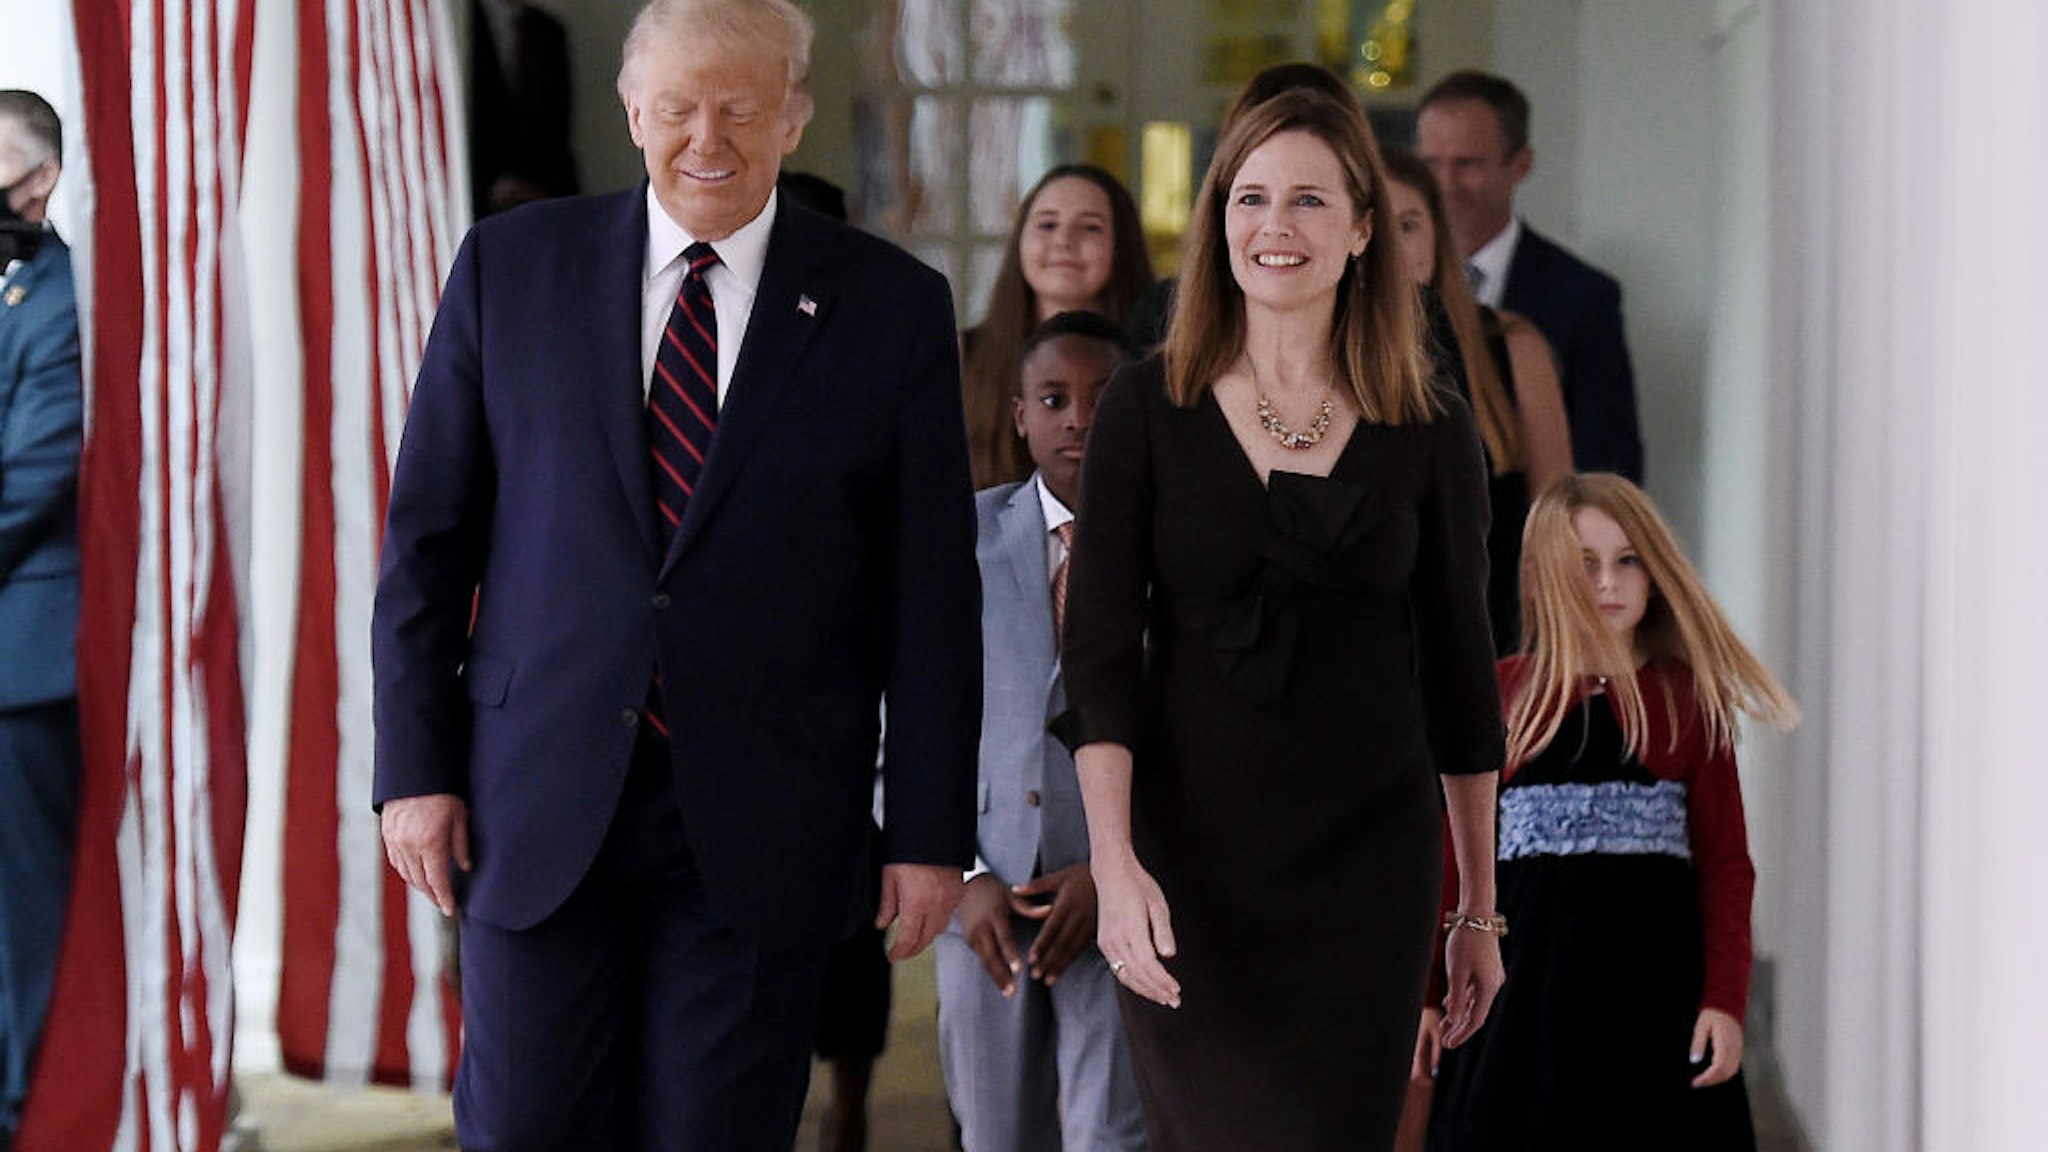 S President Donald Trump (L) and Judge Amy Coney Barrett (R), arrive at the Rose Garden of the White House in Washington, DC, on September 26, 2020. - Judge Amy Coney Barrett, who was nominated Saturday to the US Supreme Court, is a darling of conservatives for her religious views but detractors warn her confirmation would shift the nation's top court firmly to the right. (Photo by Olivier DOULIERY / AFP) (Photo by OLIVIER DOULIERY/AFP via Getty Images)